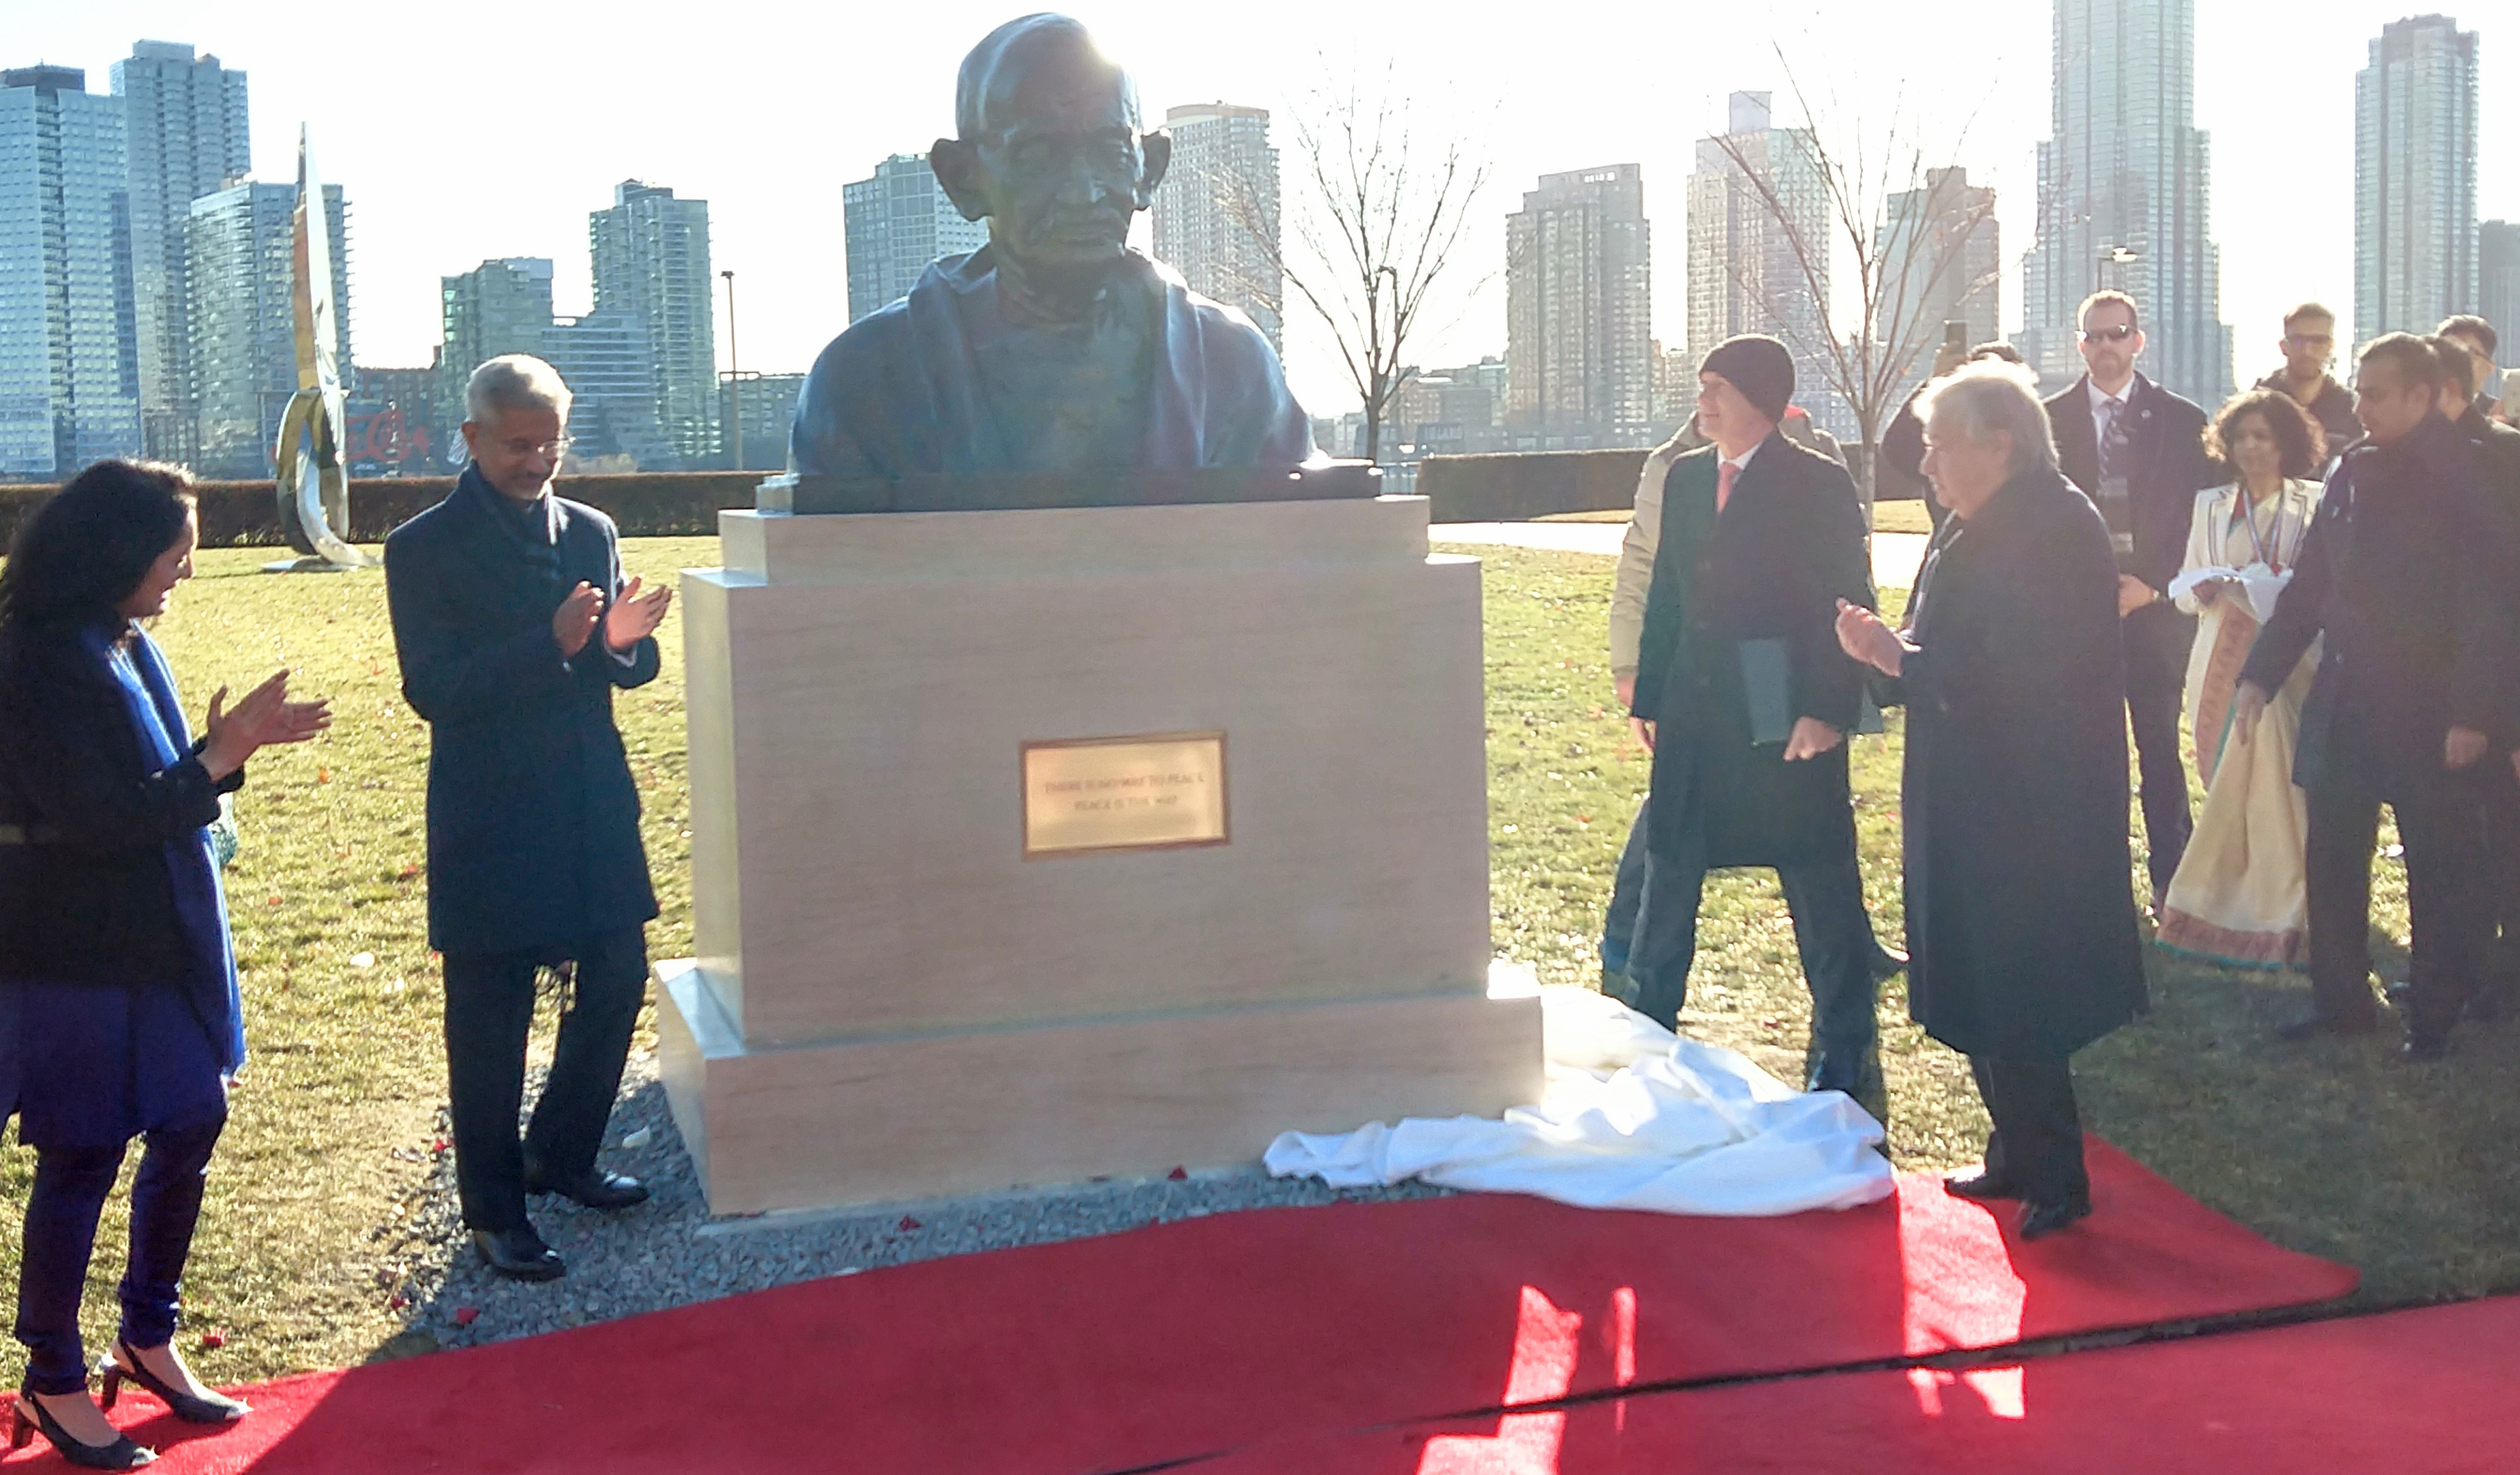 Statue of Mahatma Gandhi was unveiled at the United Nations on New York on Wednesday, December 14, 2022. Flanking the sculpture are India's External Affairs Minister S. Jaishankar and Secretary-General Antonio Guterres (right). (Photo: Arul Louis)